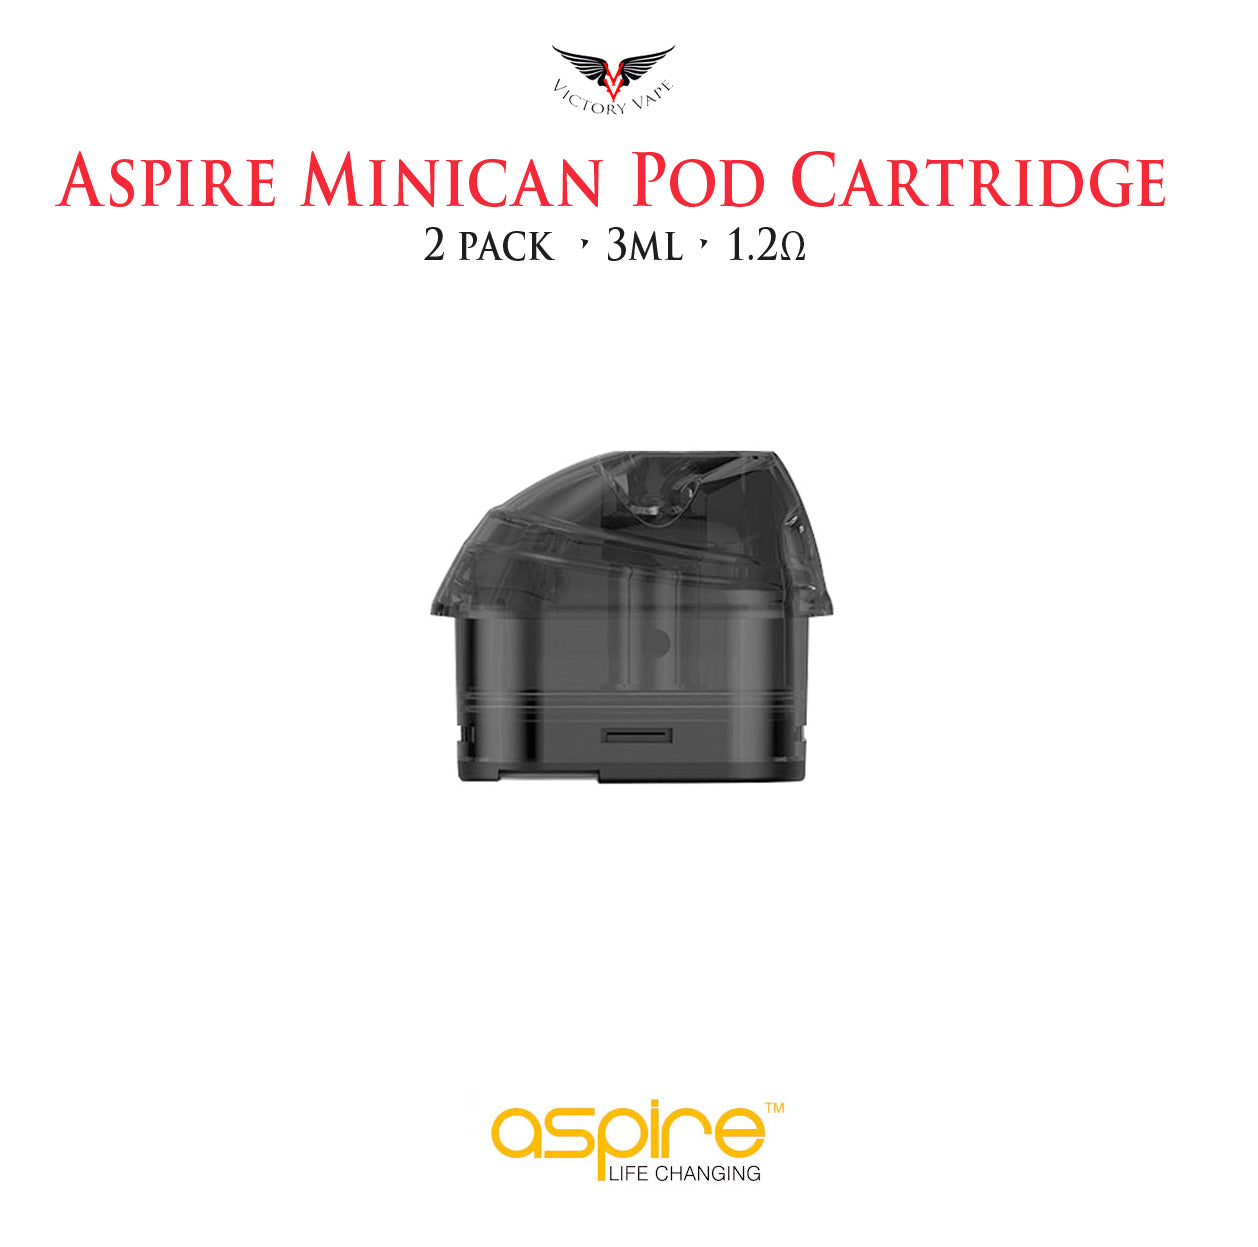  Aspire Minican Replacement Pod • 2 Pack 3ml 